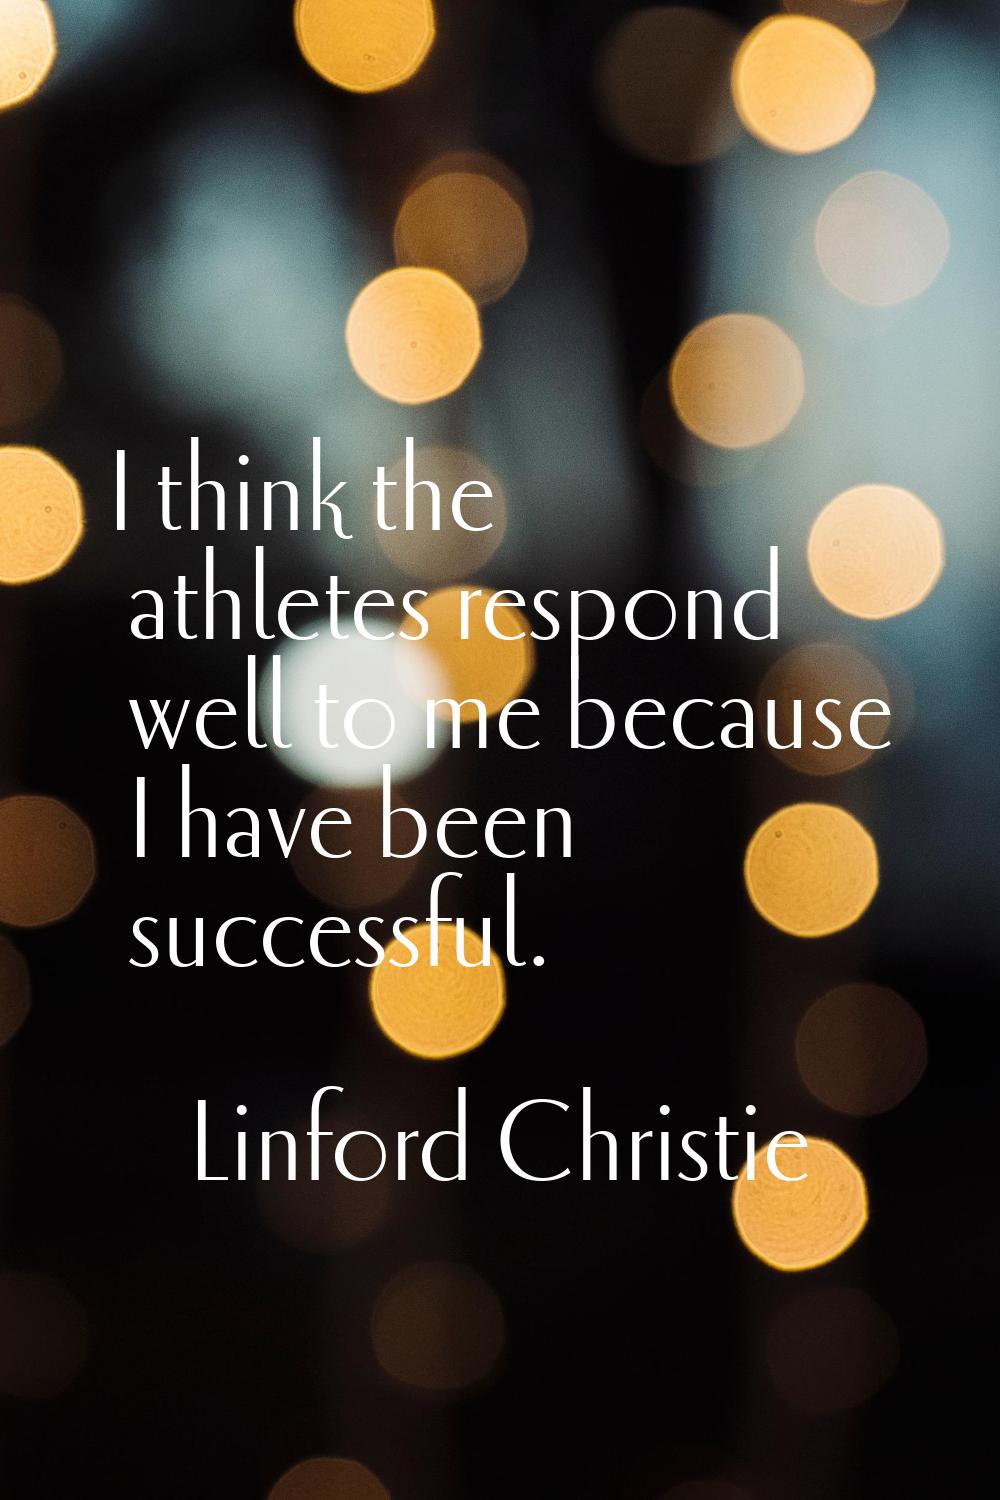 I think the athletes respond well to me because I have been successful.